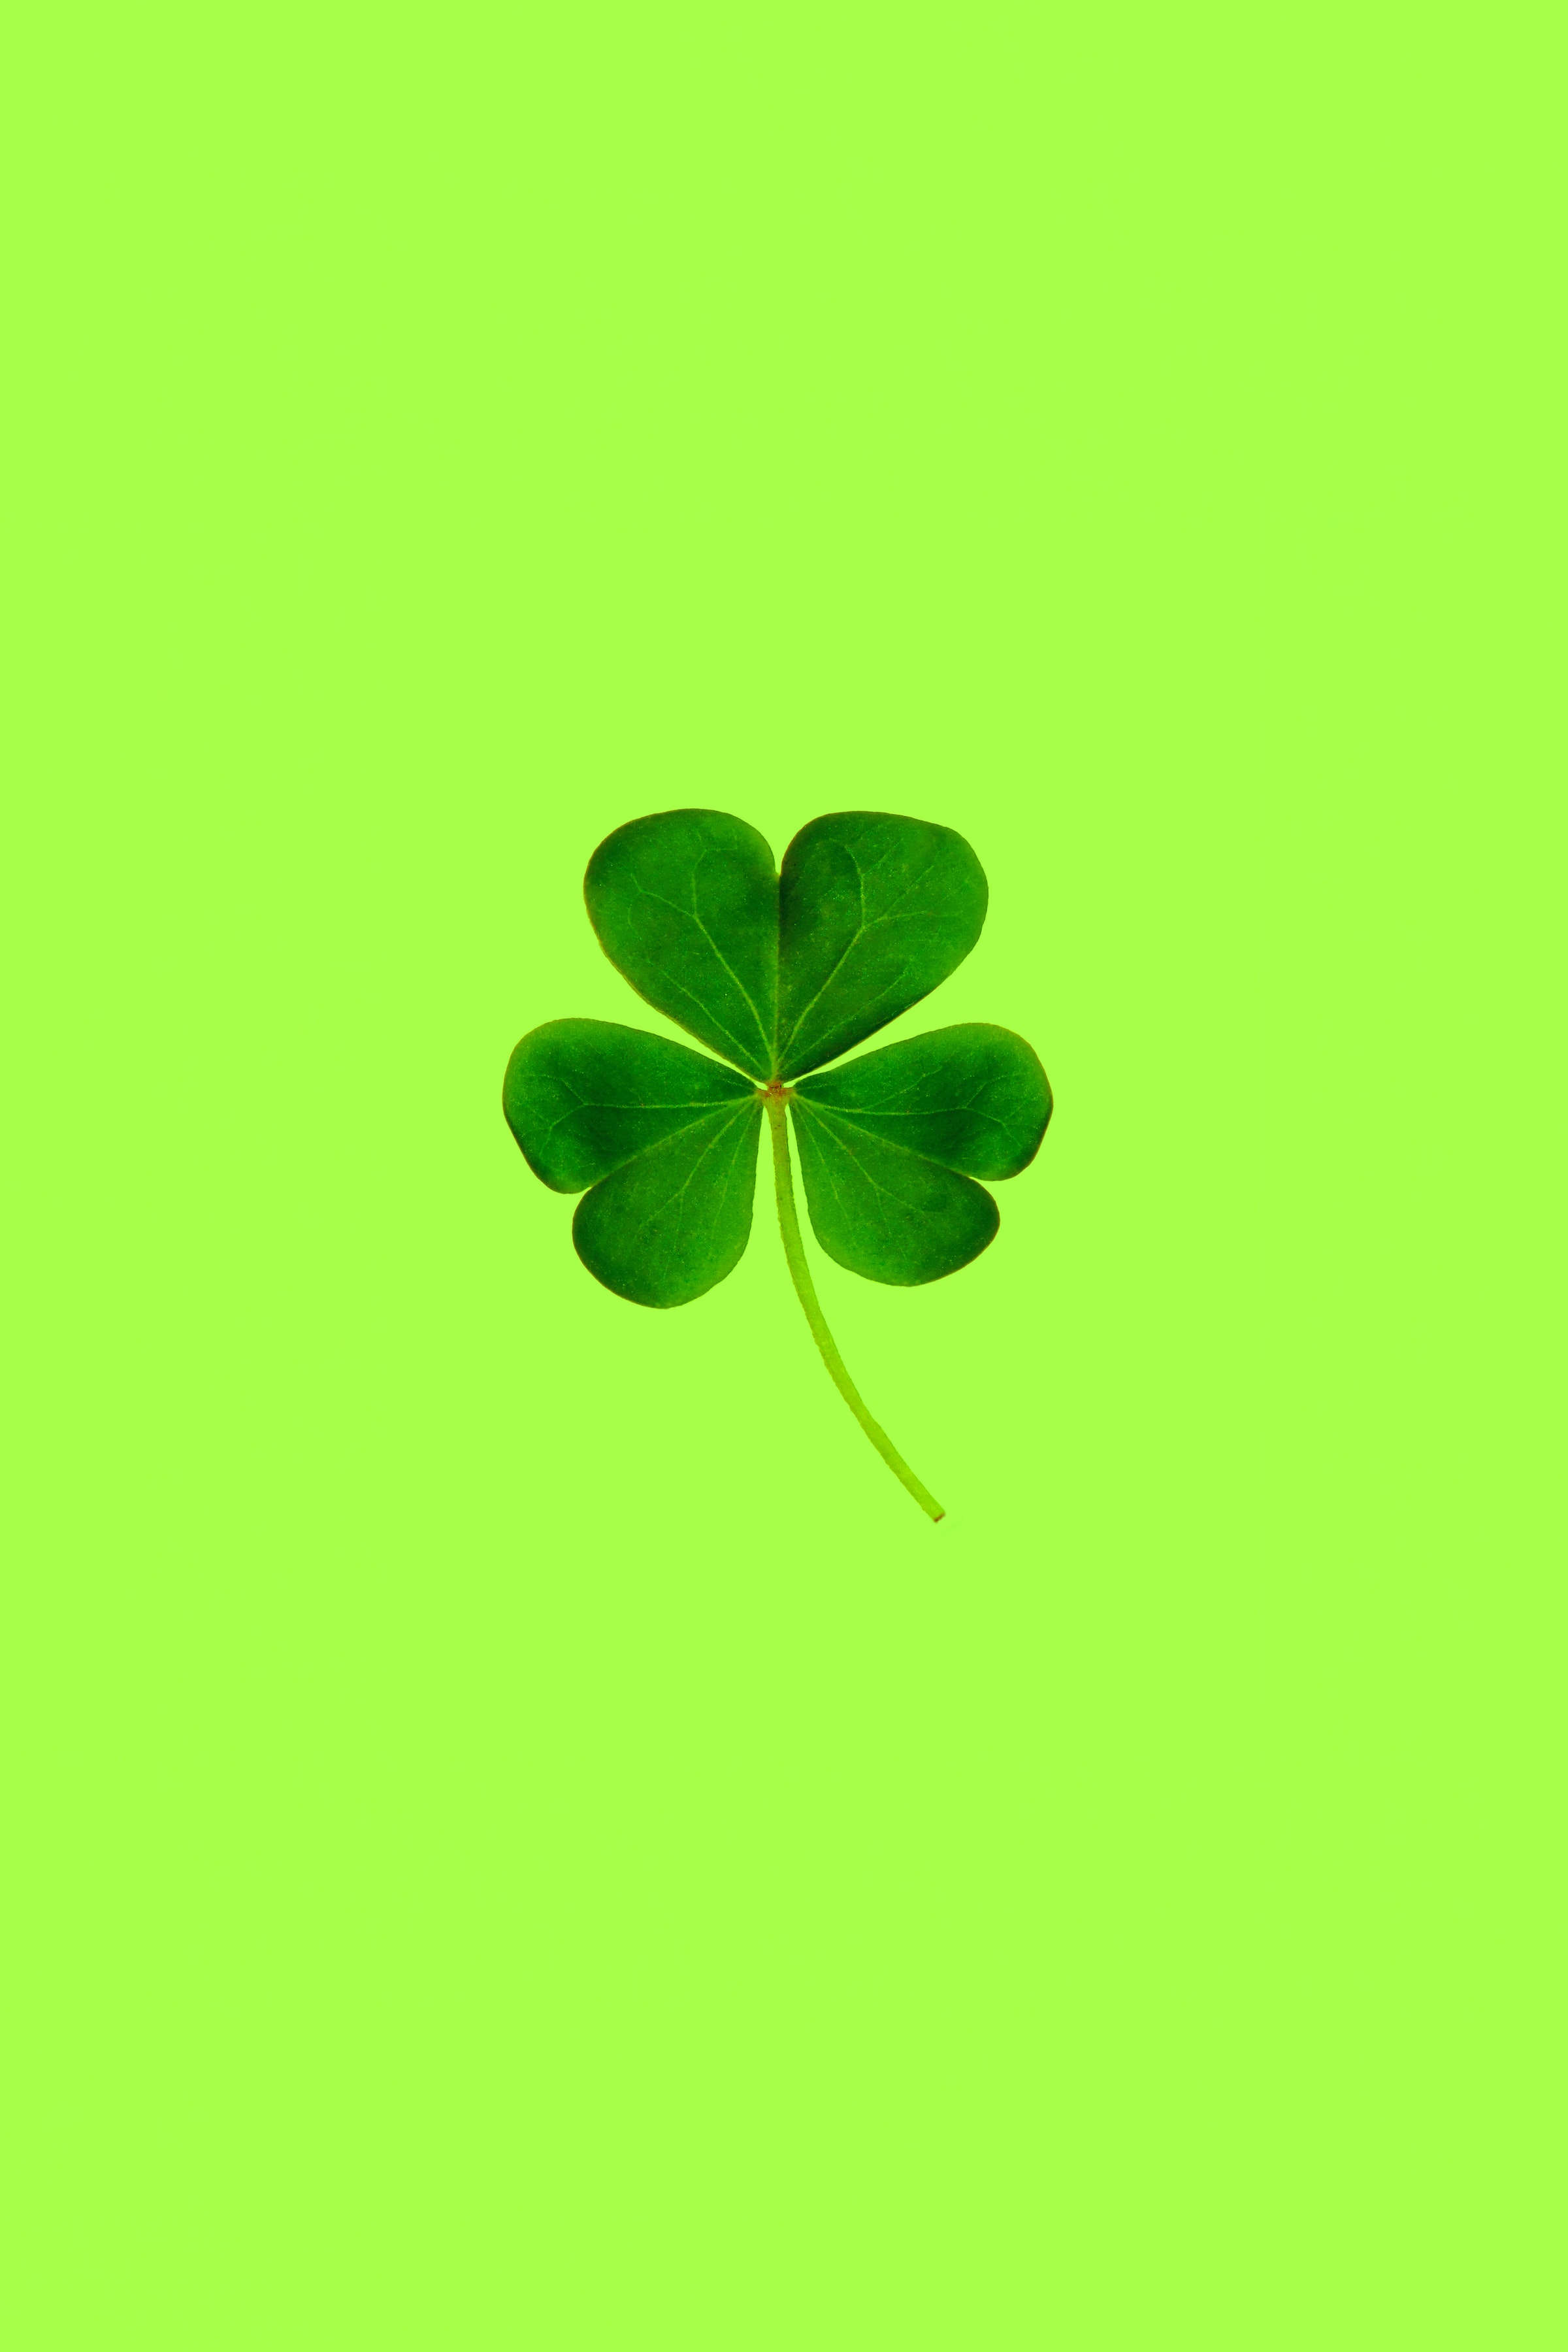 140971 download wallpaper green, macro, minimalism, clover, leaflet screensavers and pictures for free